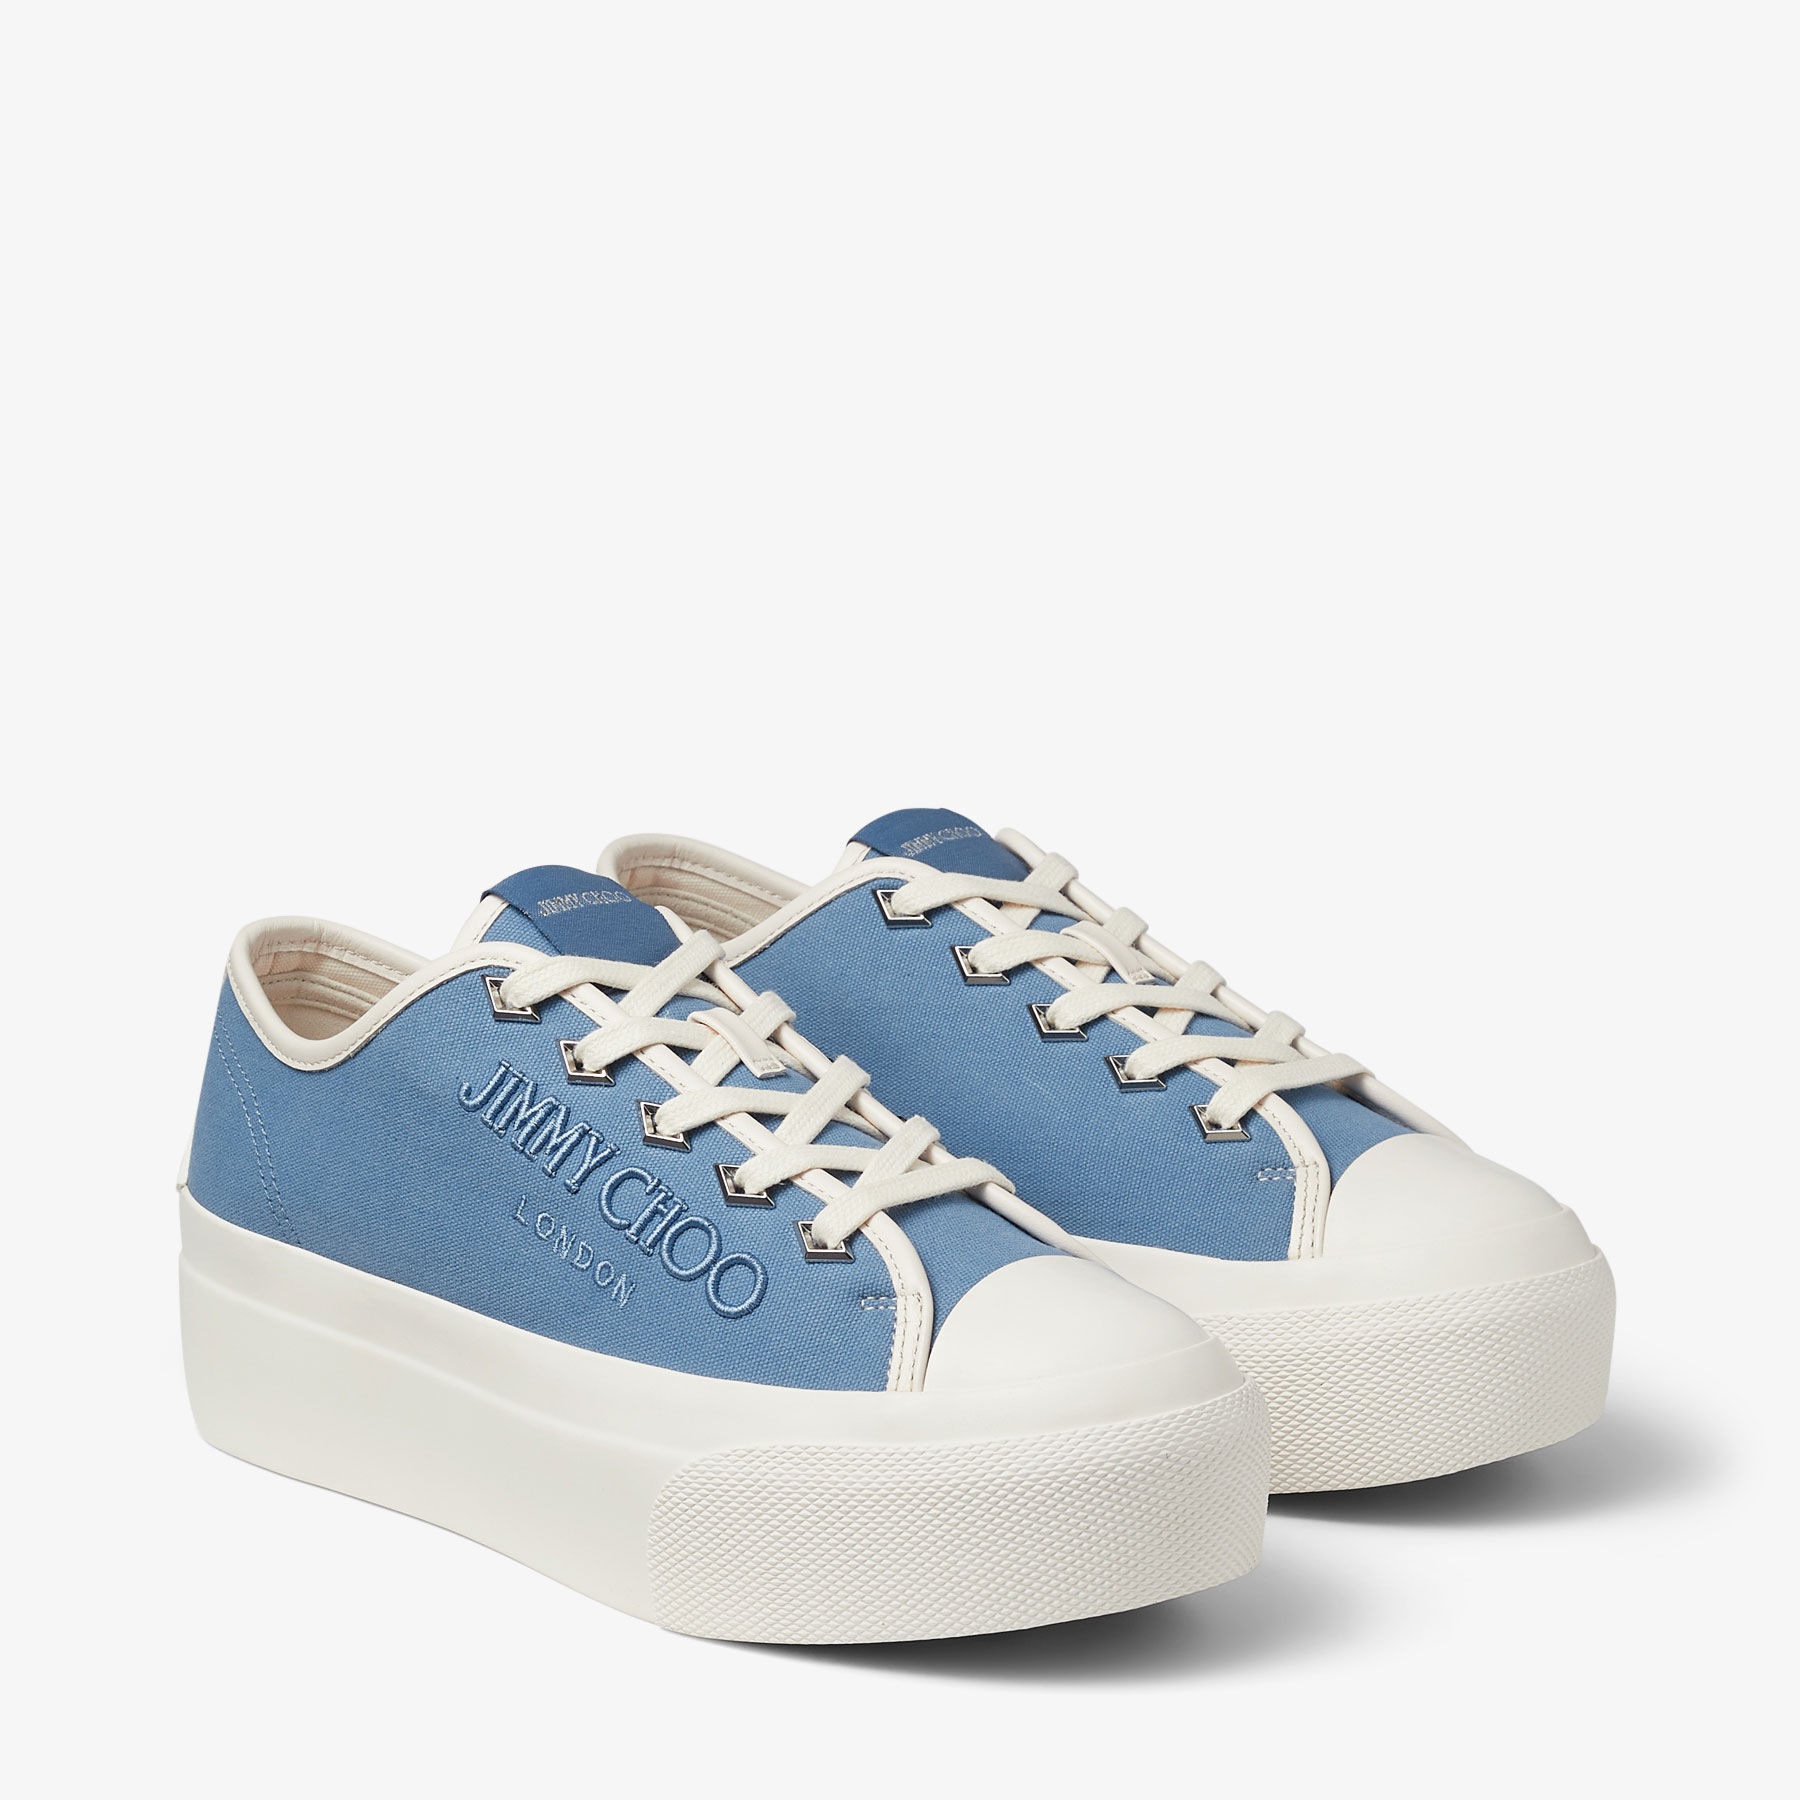 Palma Maxi/F
Denim and Latte Canvas Platform Trainers with Embroidered Logo - 2